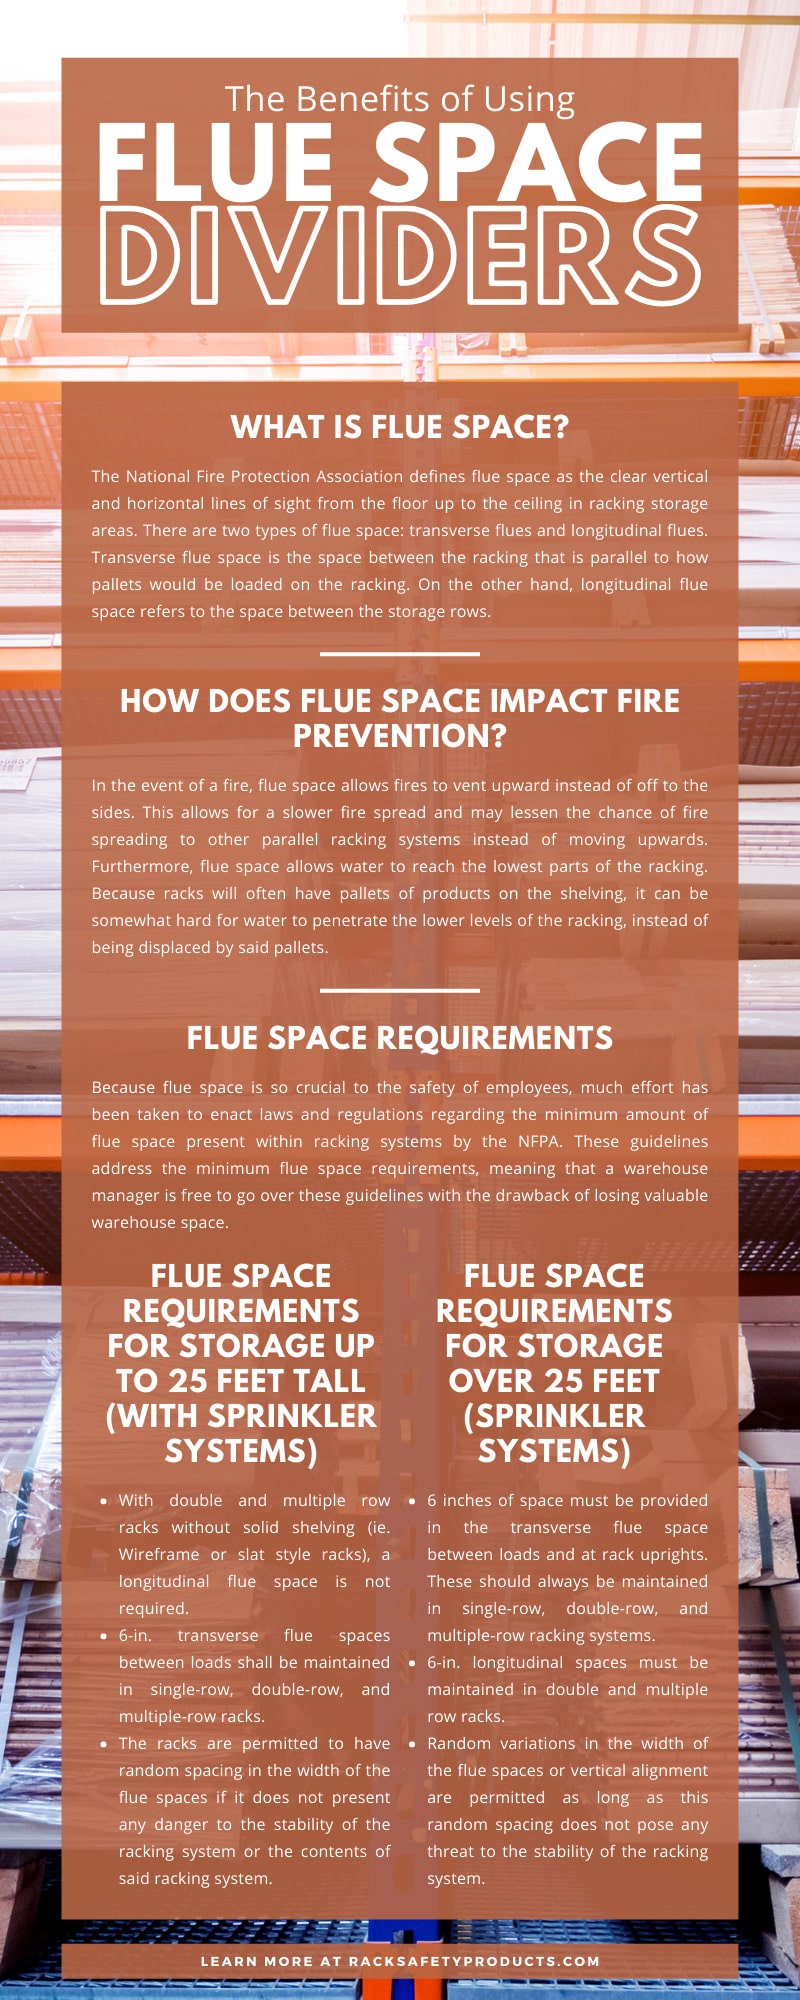 The Benefits of Using Flue Space Dividers